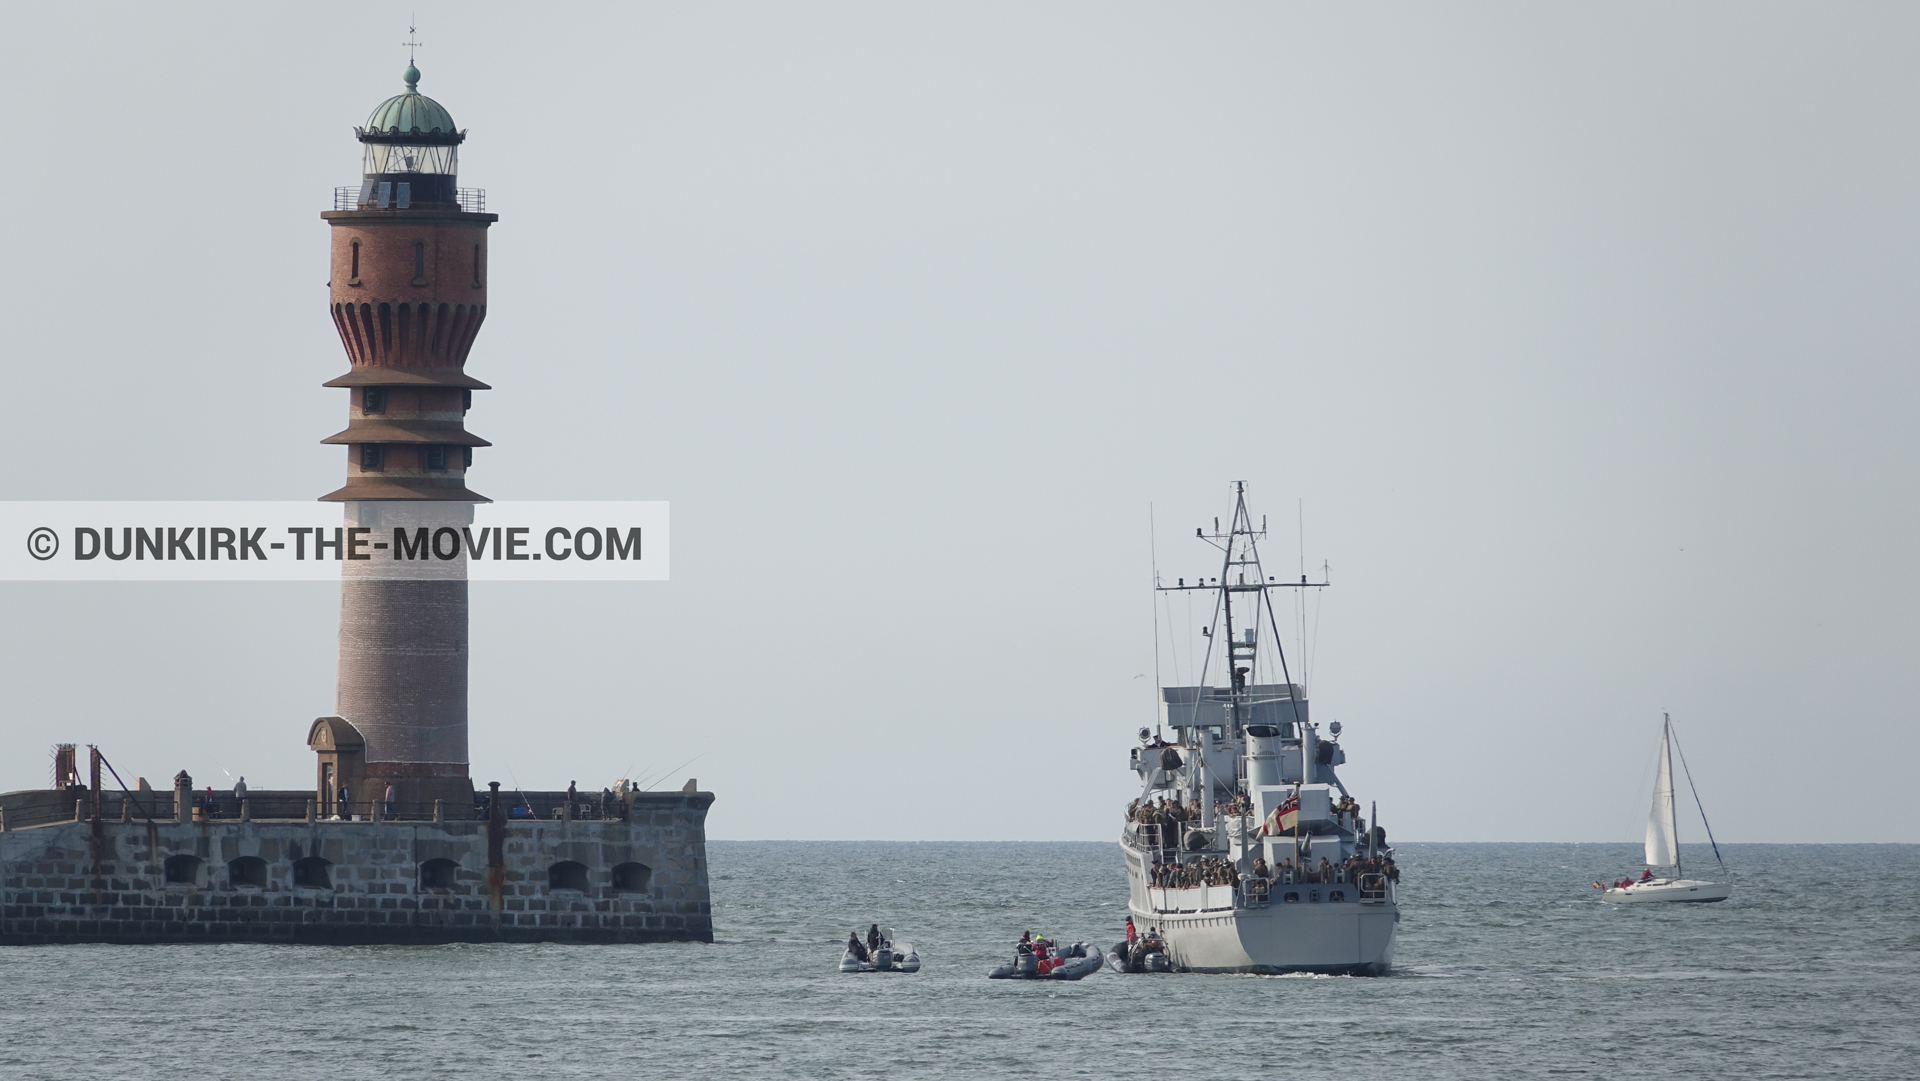 Picture with boat, F34 - Hr.Ms. Sittard, St Pol sur Mer lighthouse, inflatable dinghy,  from behind the scene of the Dunkirk movie by Nolan